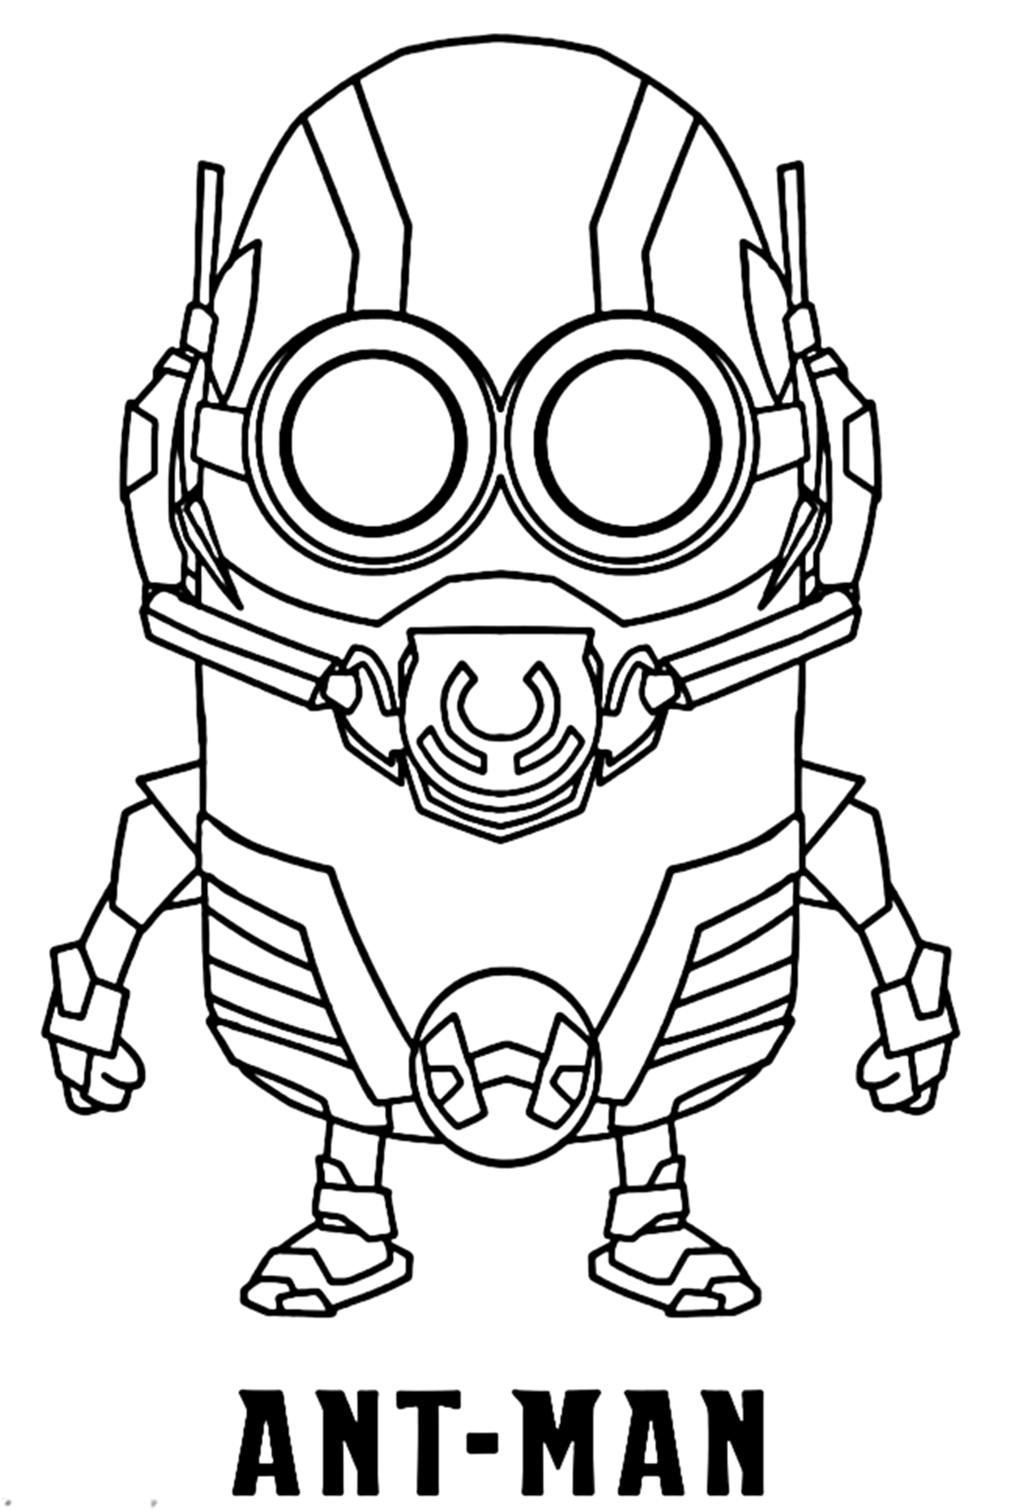 Chibi Cute Robot Ant-man In Ant-man cartoon Coloring Page